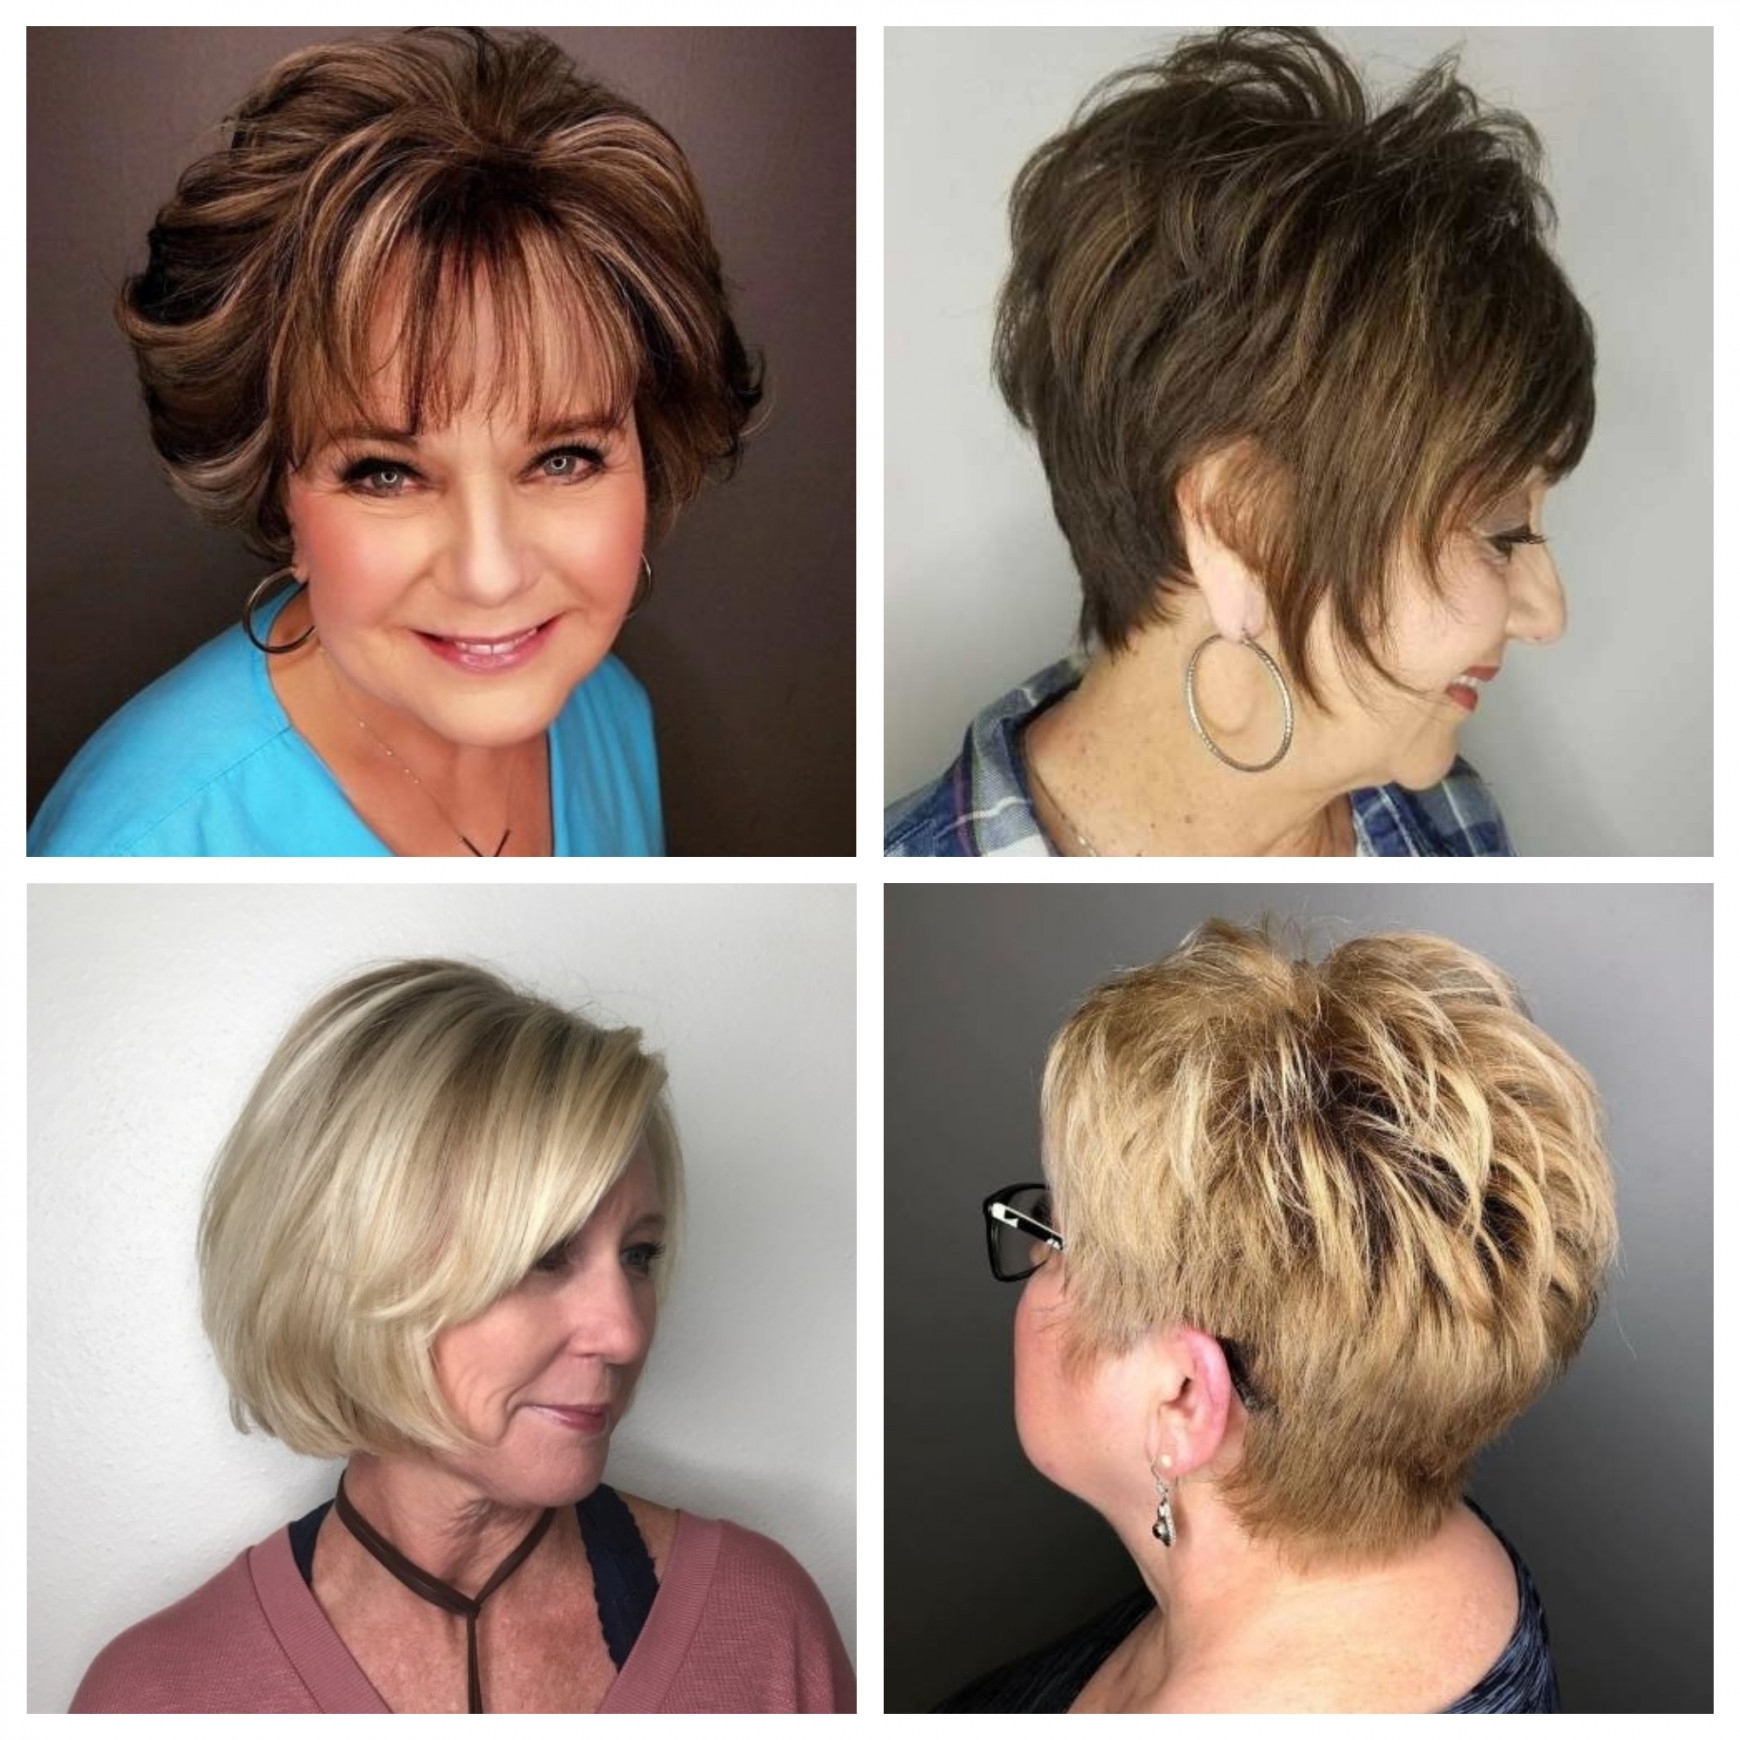 Short Hairstyles For Women Over 60 | 2019 Haircuts throughout Short Haircuts For Women Over 60 2019